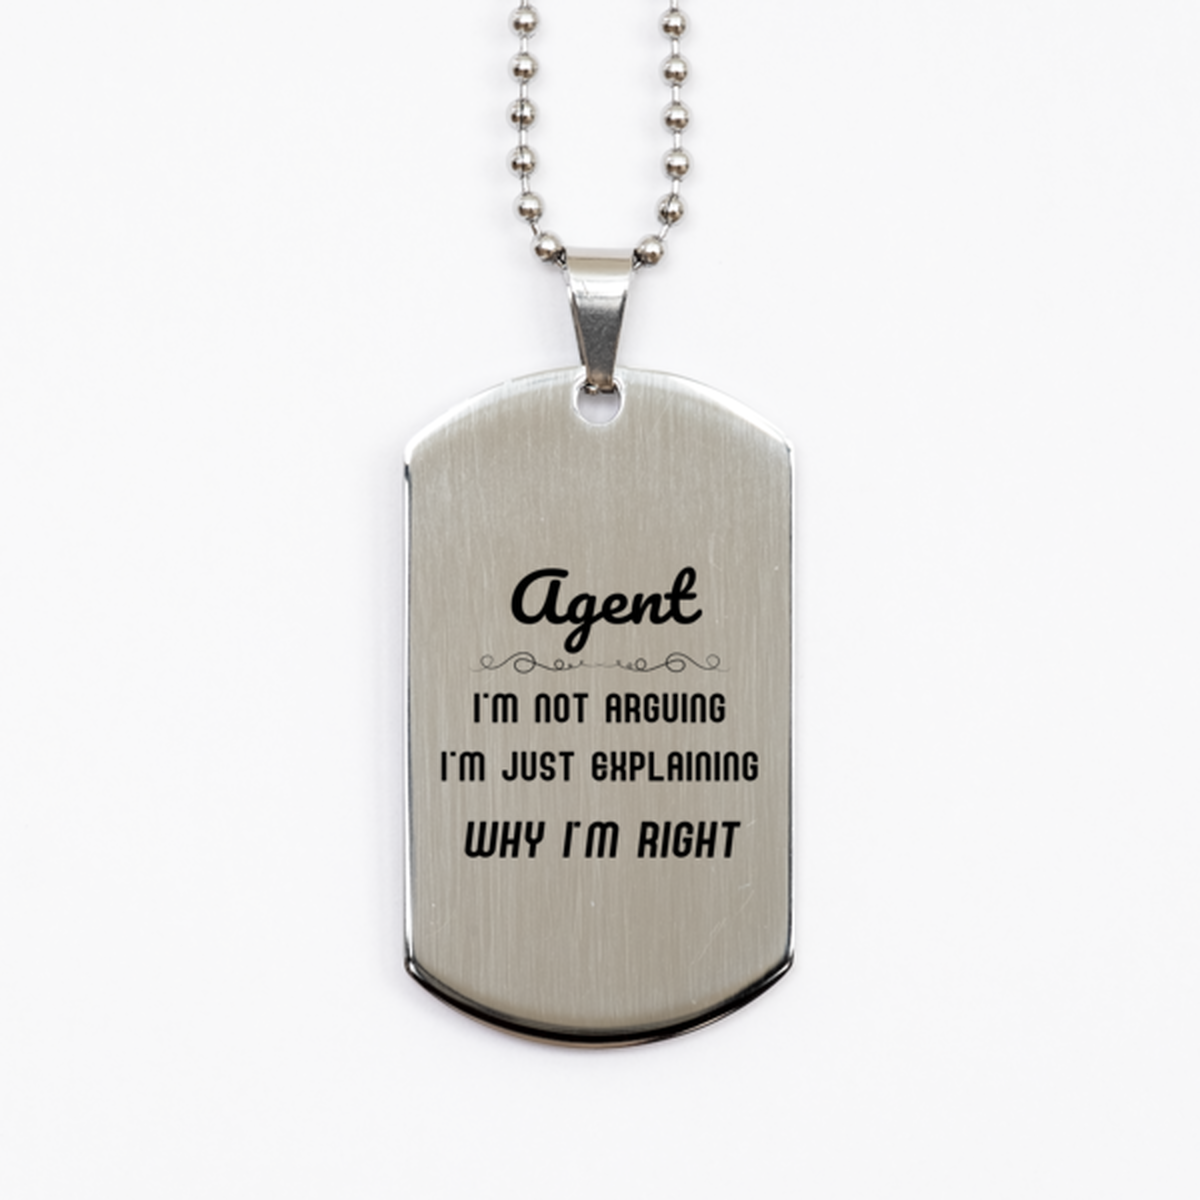 Agent I'm not Arguing. I'm Just Explaining Why I'm RIGHT Silver Dog Tag, Funny Saying Quote Agent Gifts For Agent Graduation Birthday Christmas Gifts for Men Women Coworker